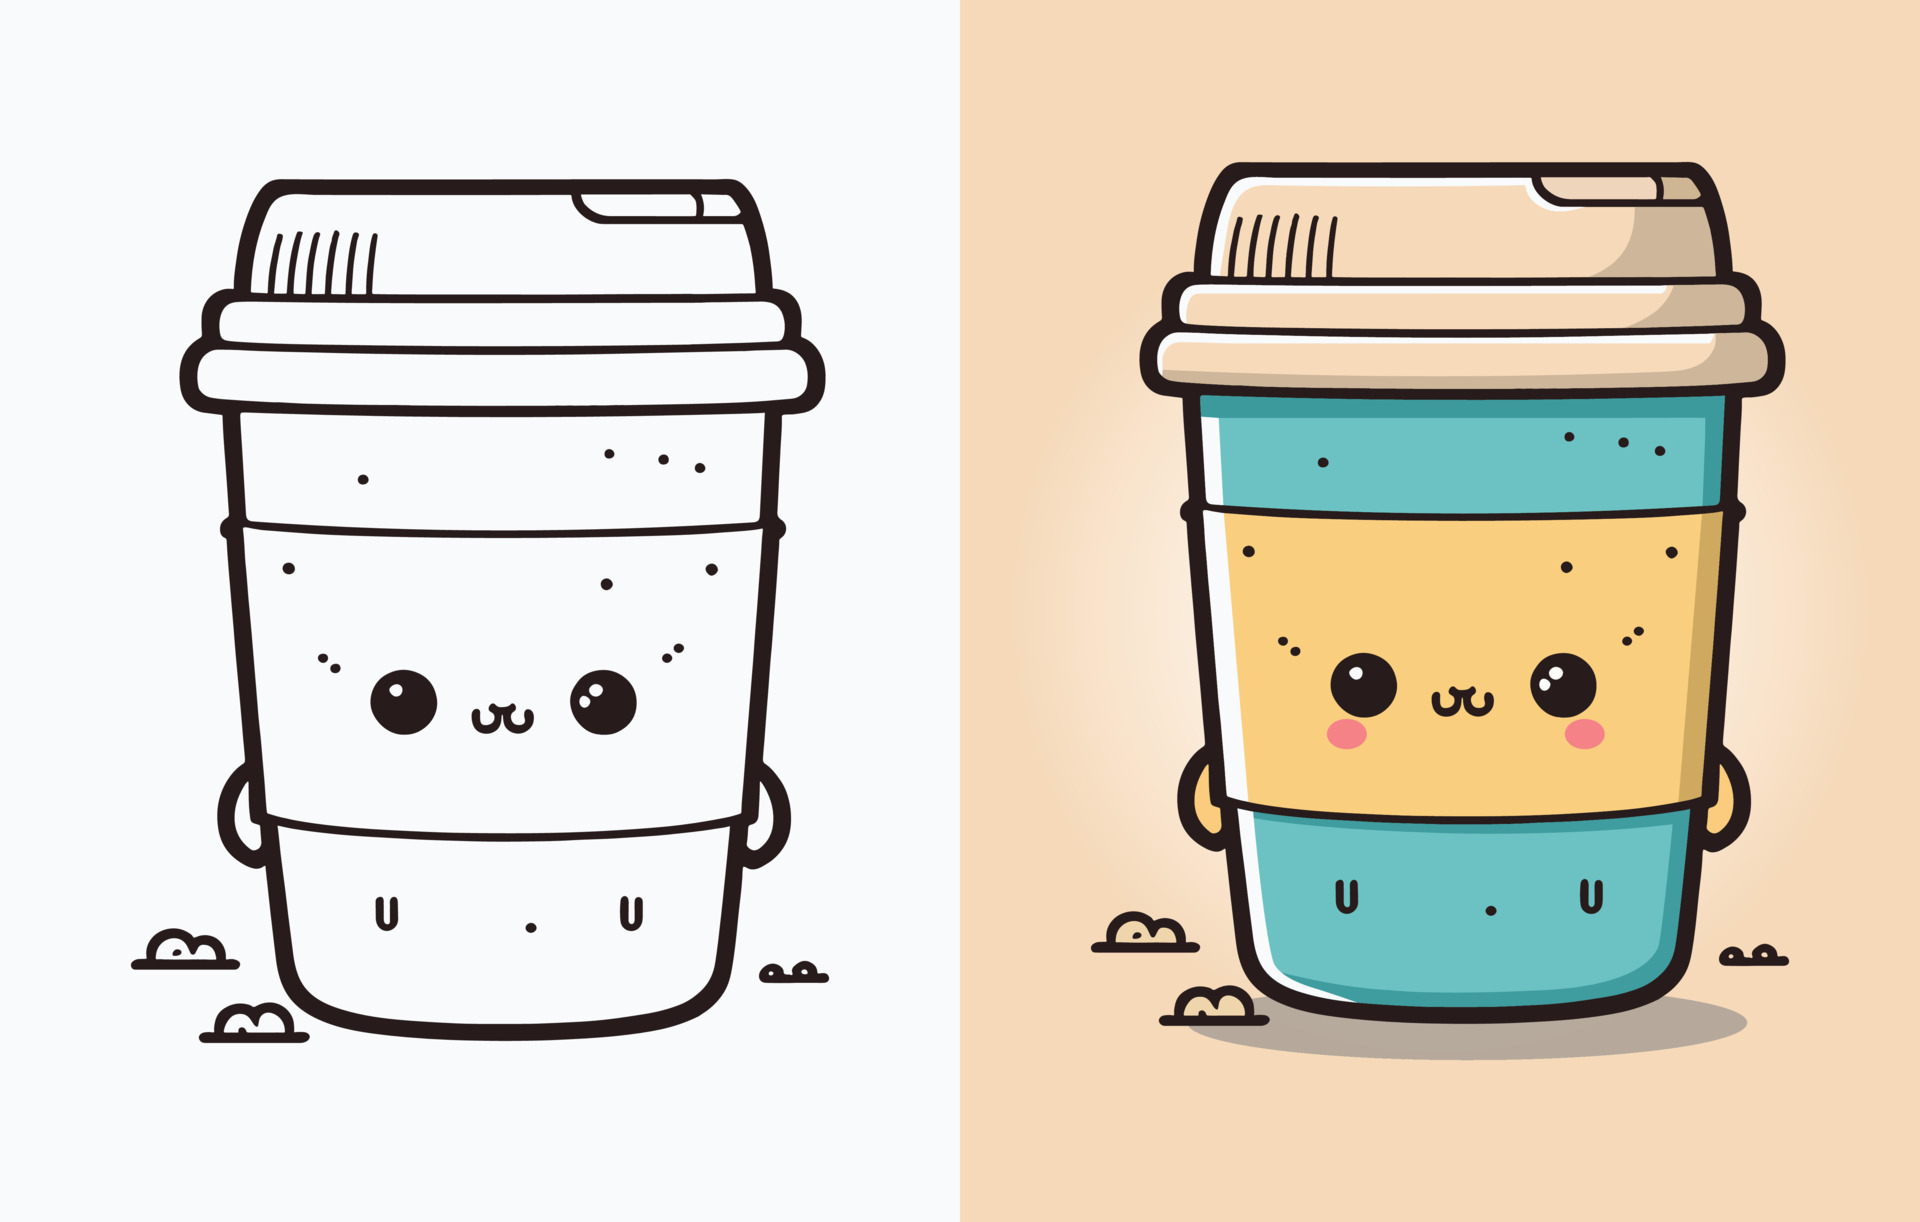 https://static.vecteezy.com/system/resources/previews/022/702/158/original/coffee-cup-logo-cute-coffee-cup-cartoon-line-art-colorful-illustration-coffee-cup-icon-design-flat-carton-style-food-and-drink-icon-vector.jpg